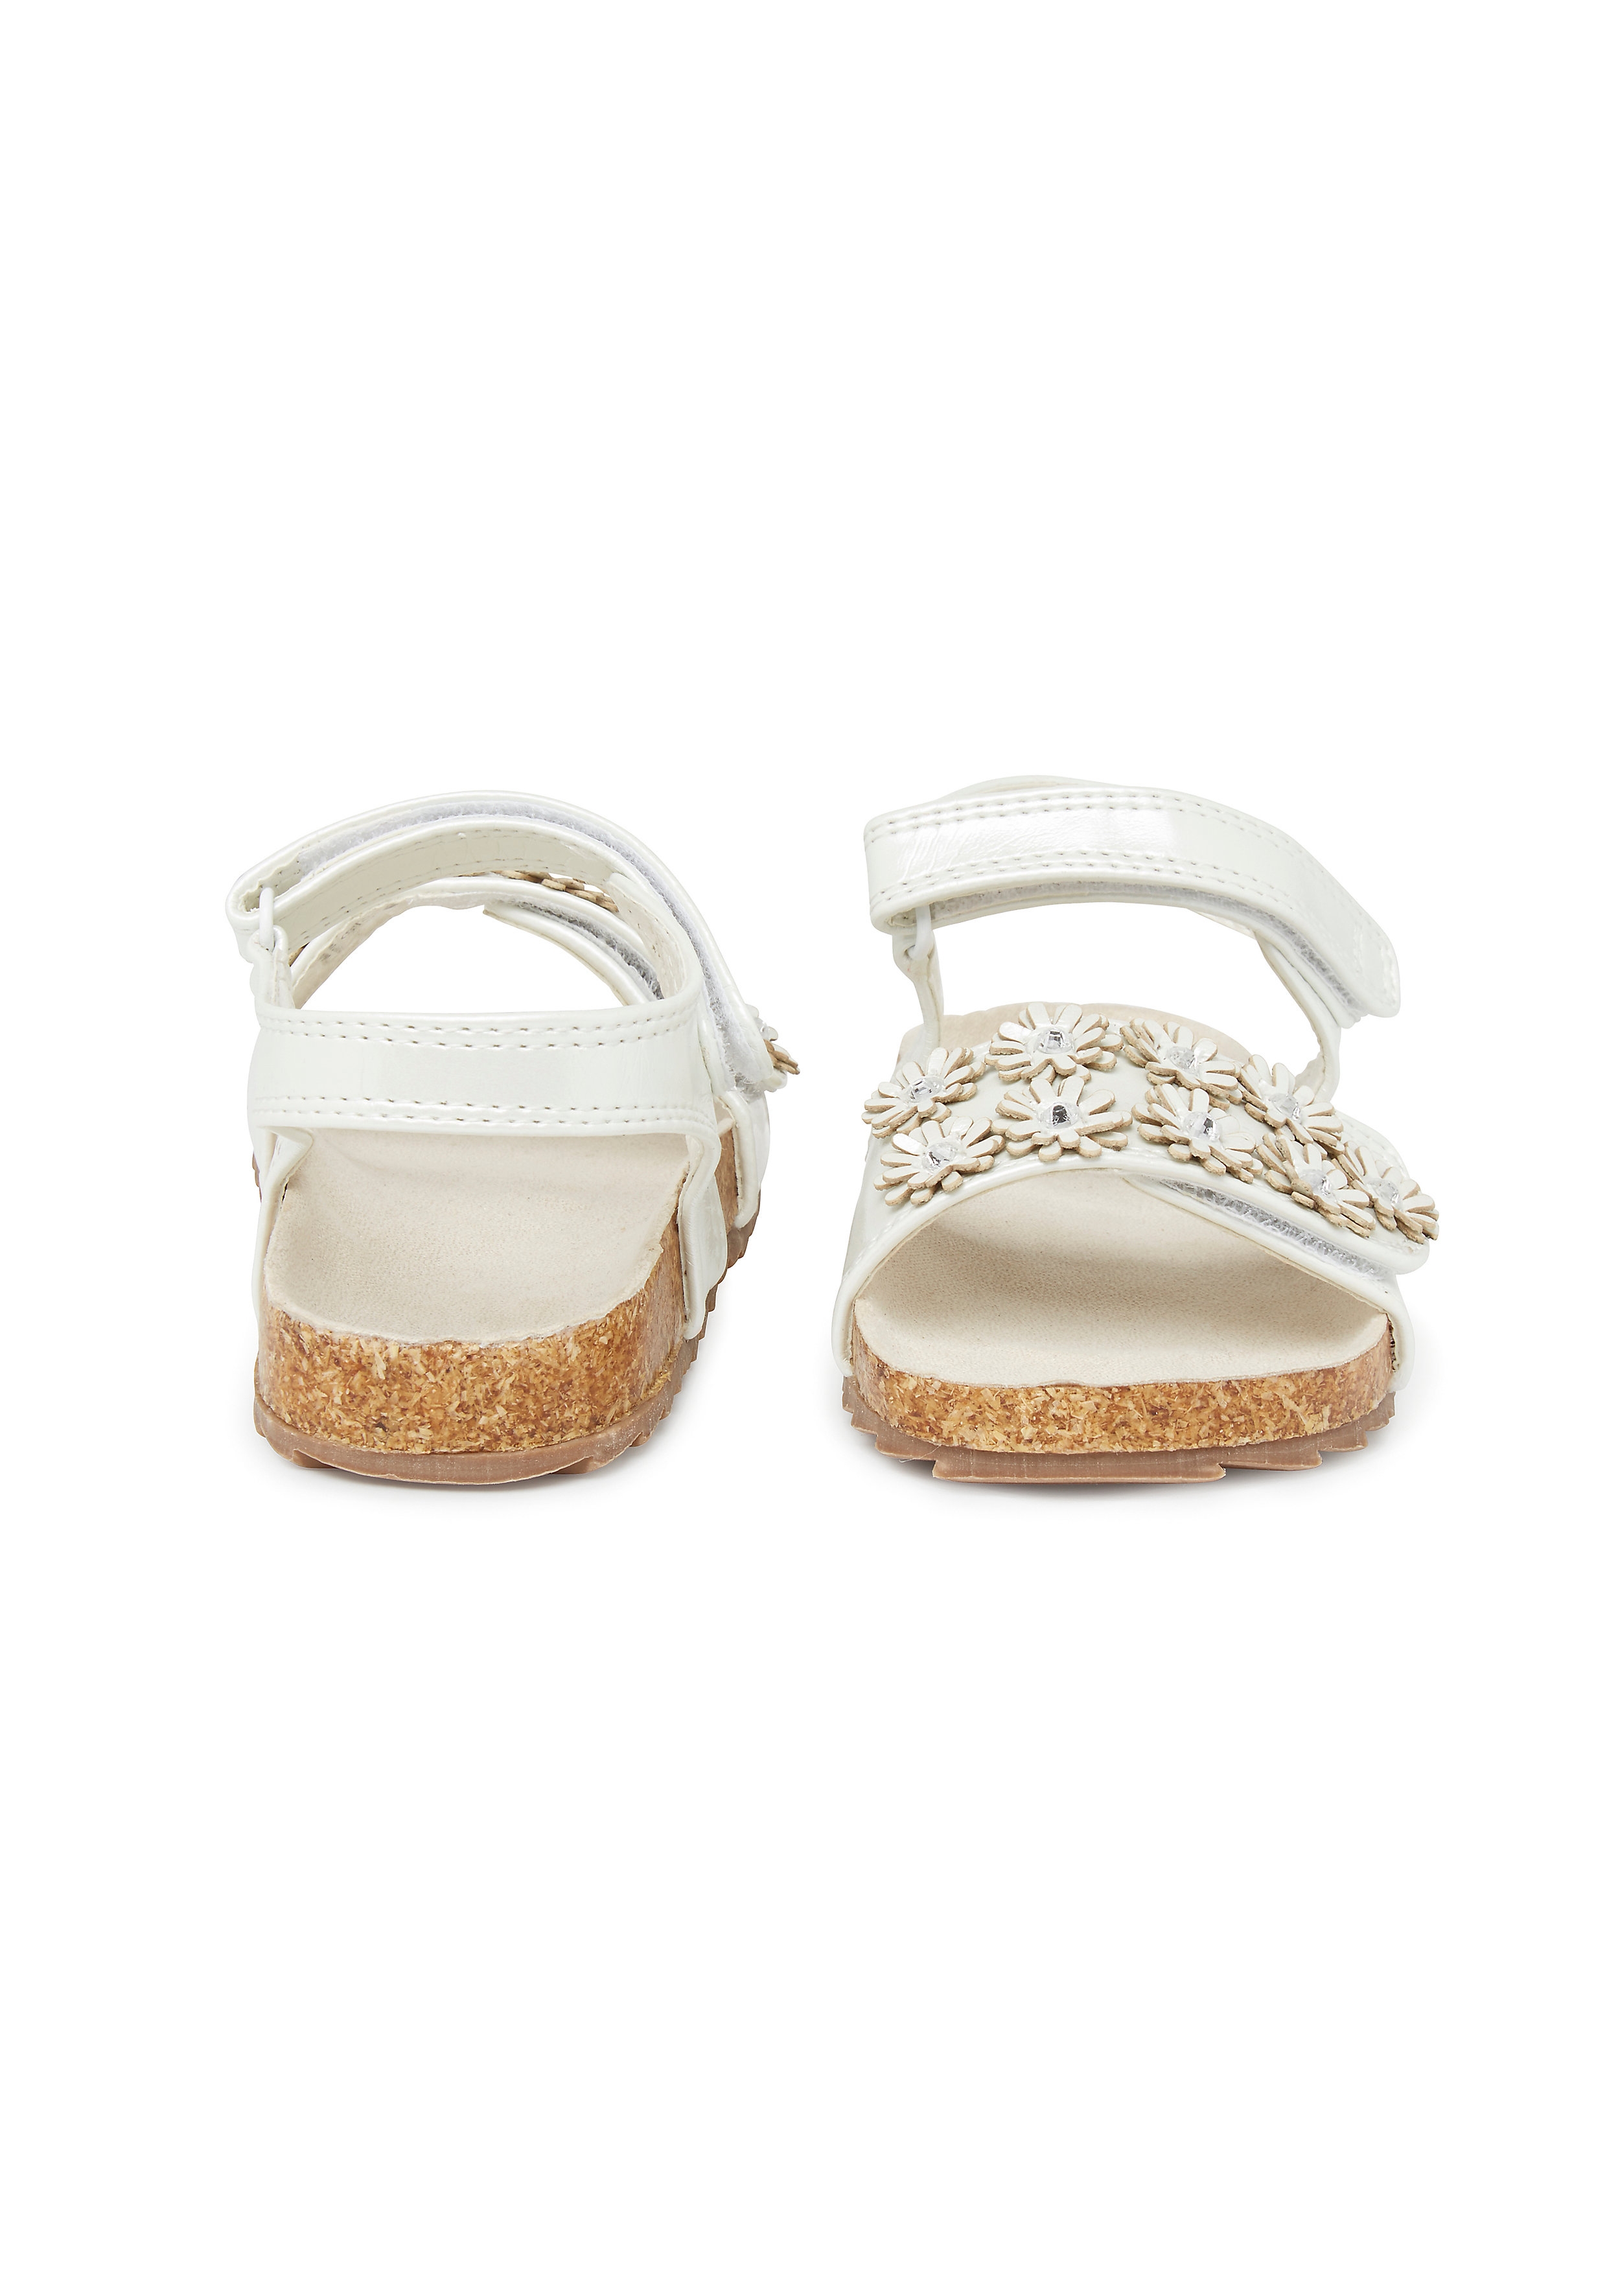 Mothercare | Girls Flower Footbed Sandals - Cream 1